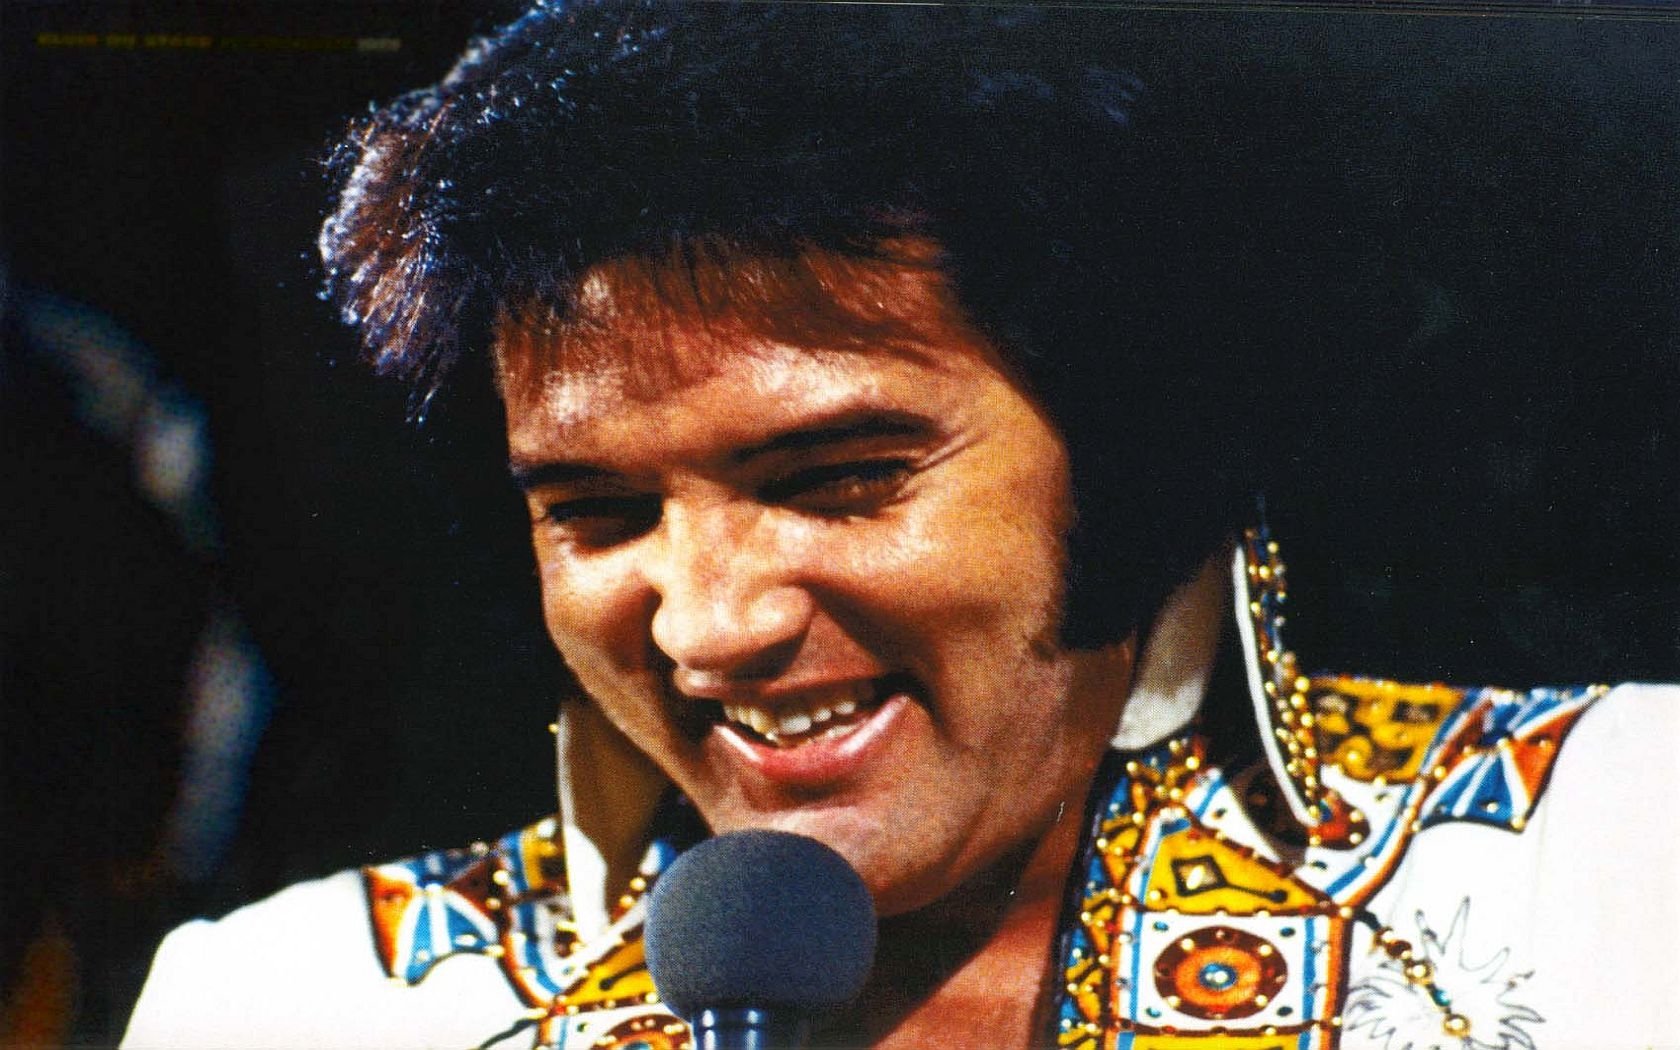 The King Elvis Presley! Image - ID: 224173 - Image Abyss